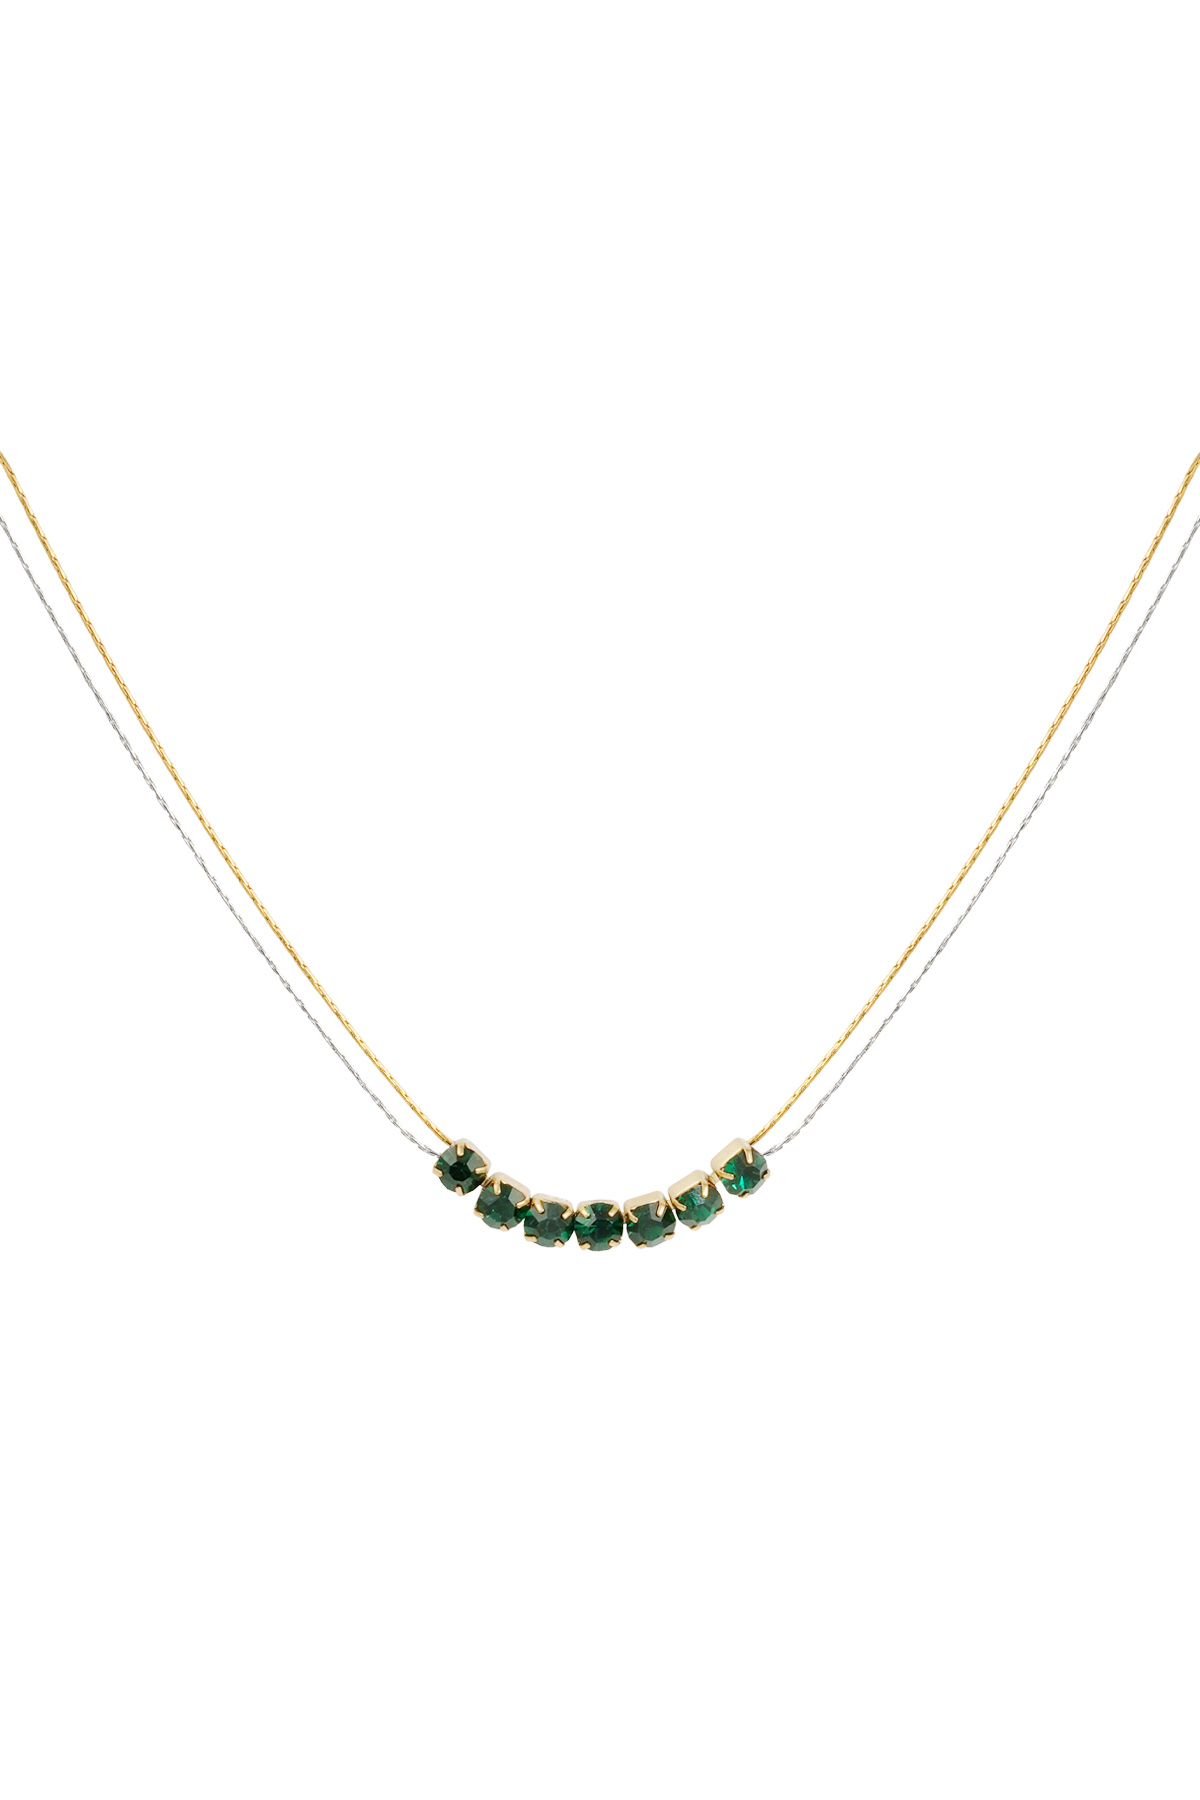 Necklace gold/silver with stone - green h5 